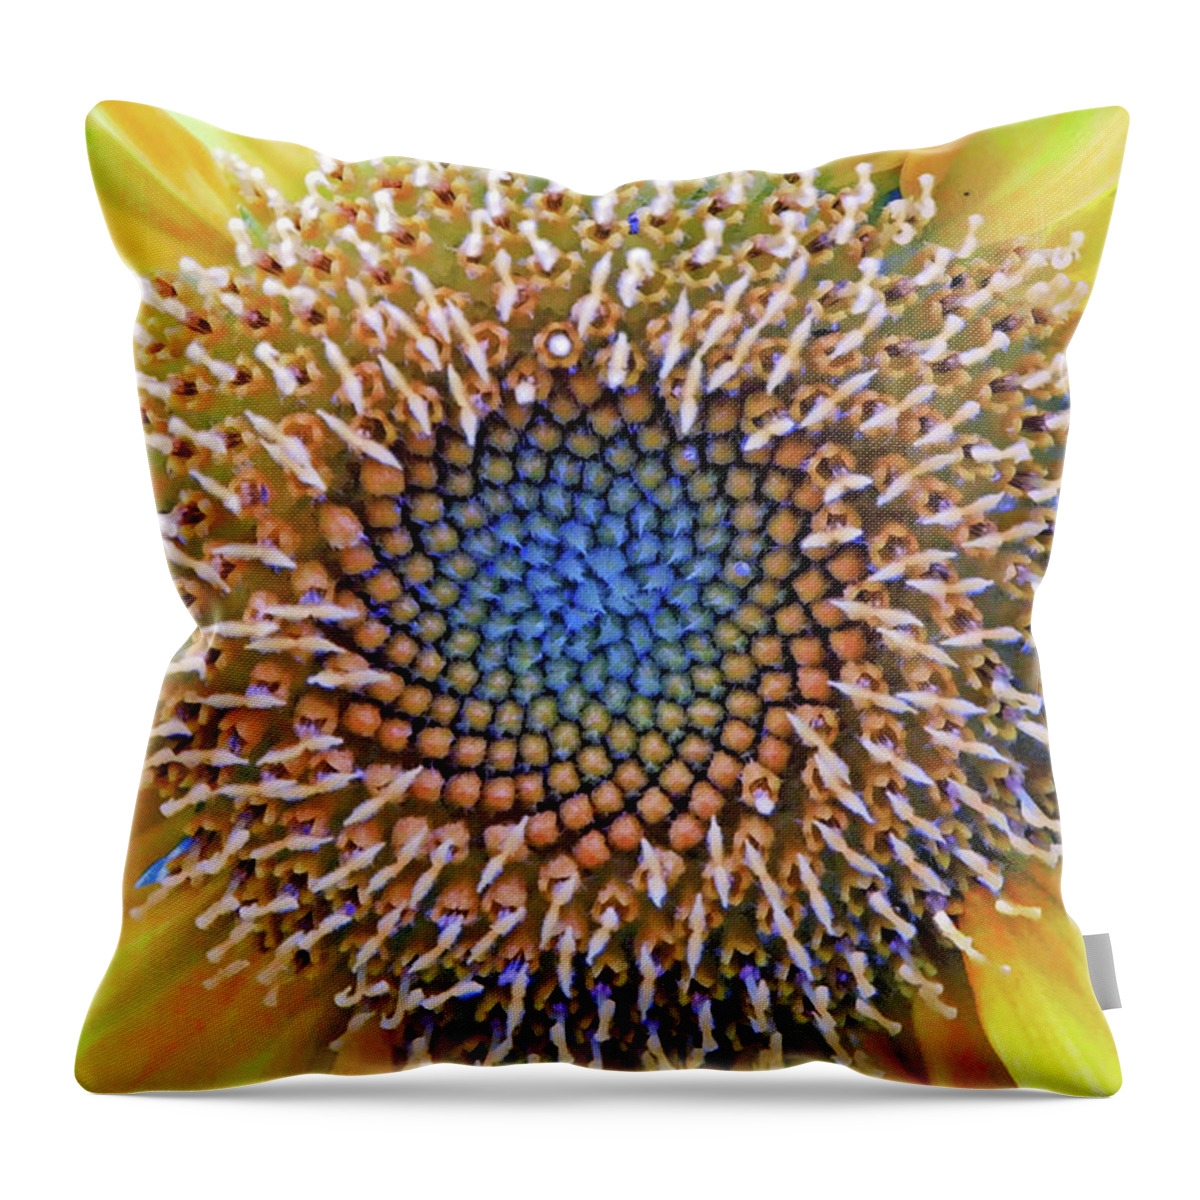 Pacino Gold Sunflower Throw Pillow featuring the photograph Sunflower Jewels by Suzanne Stout